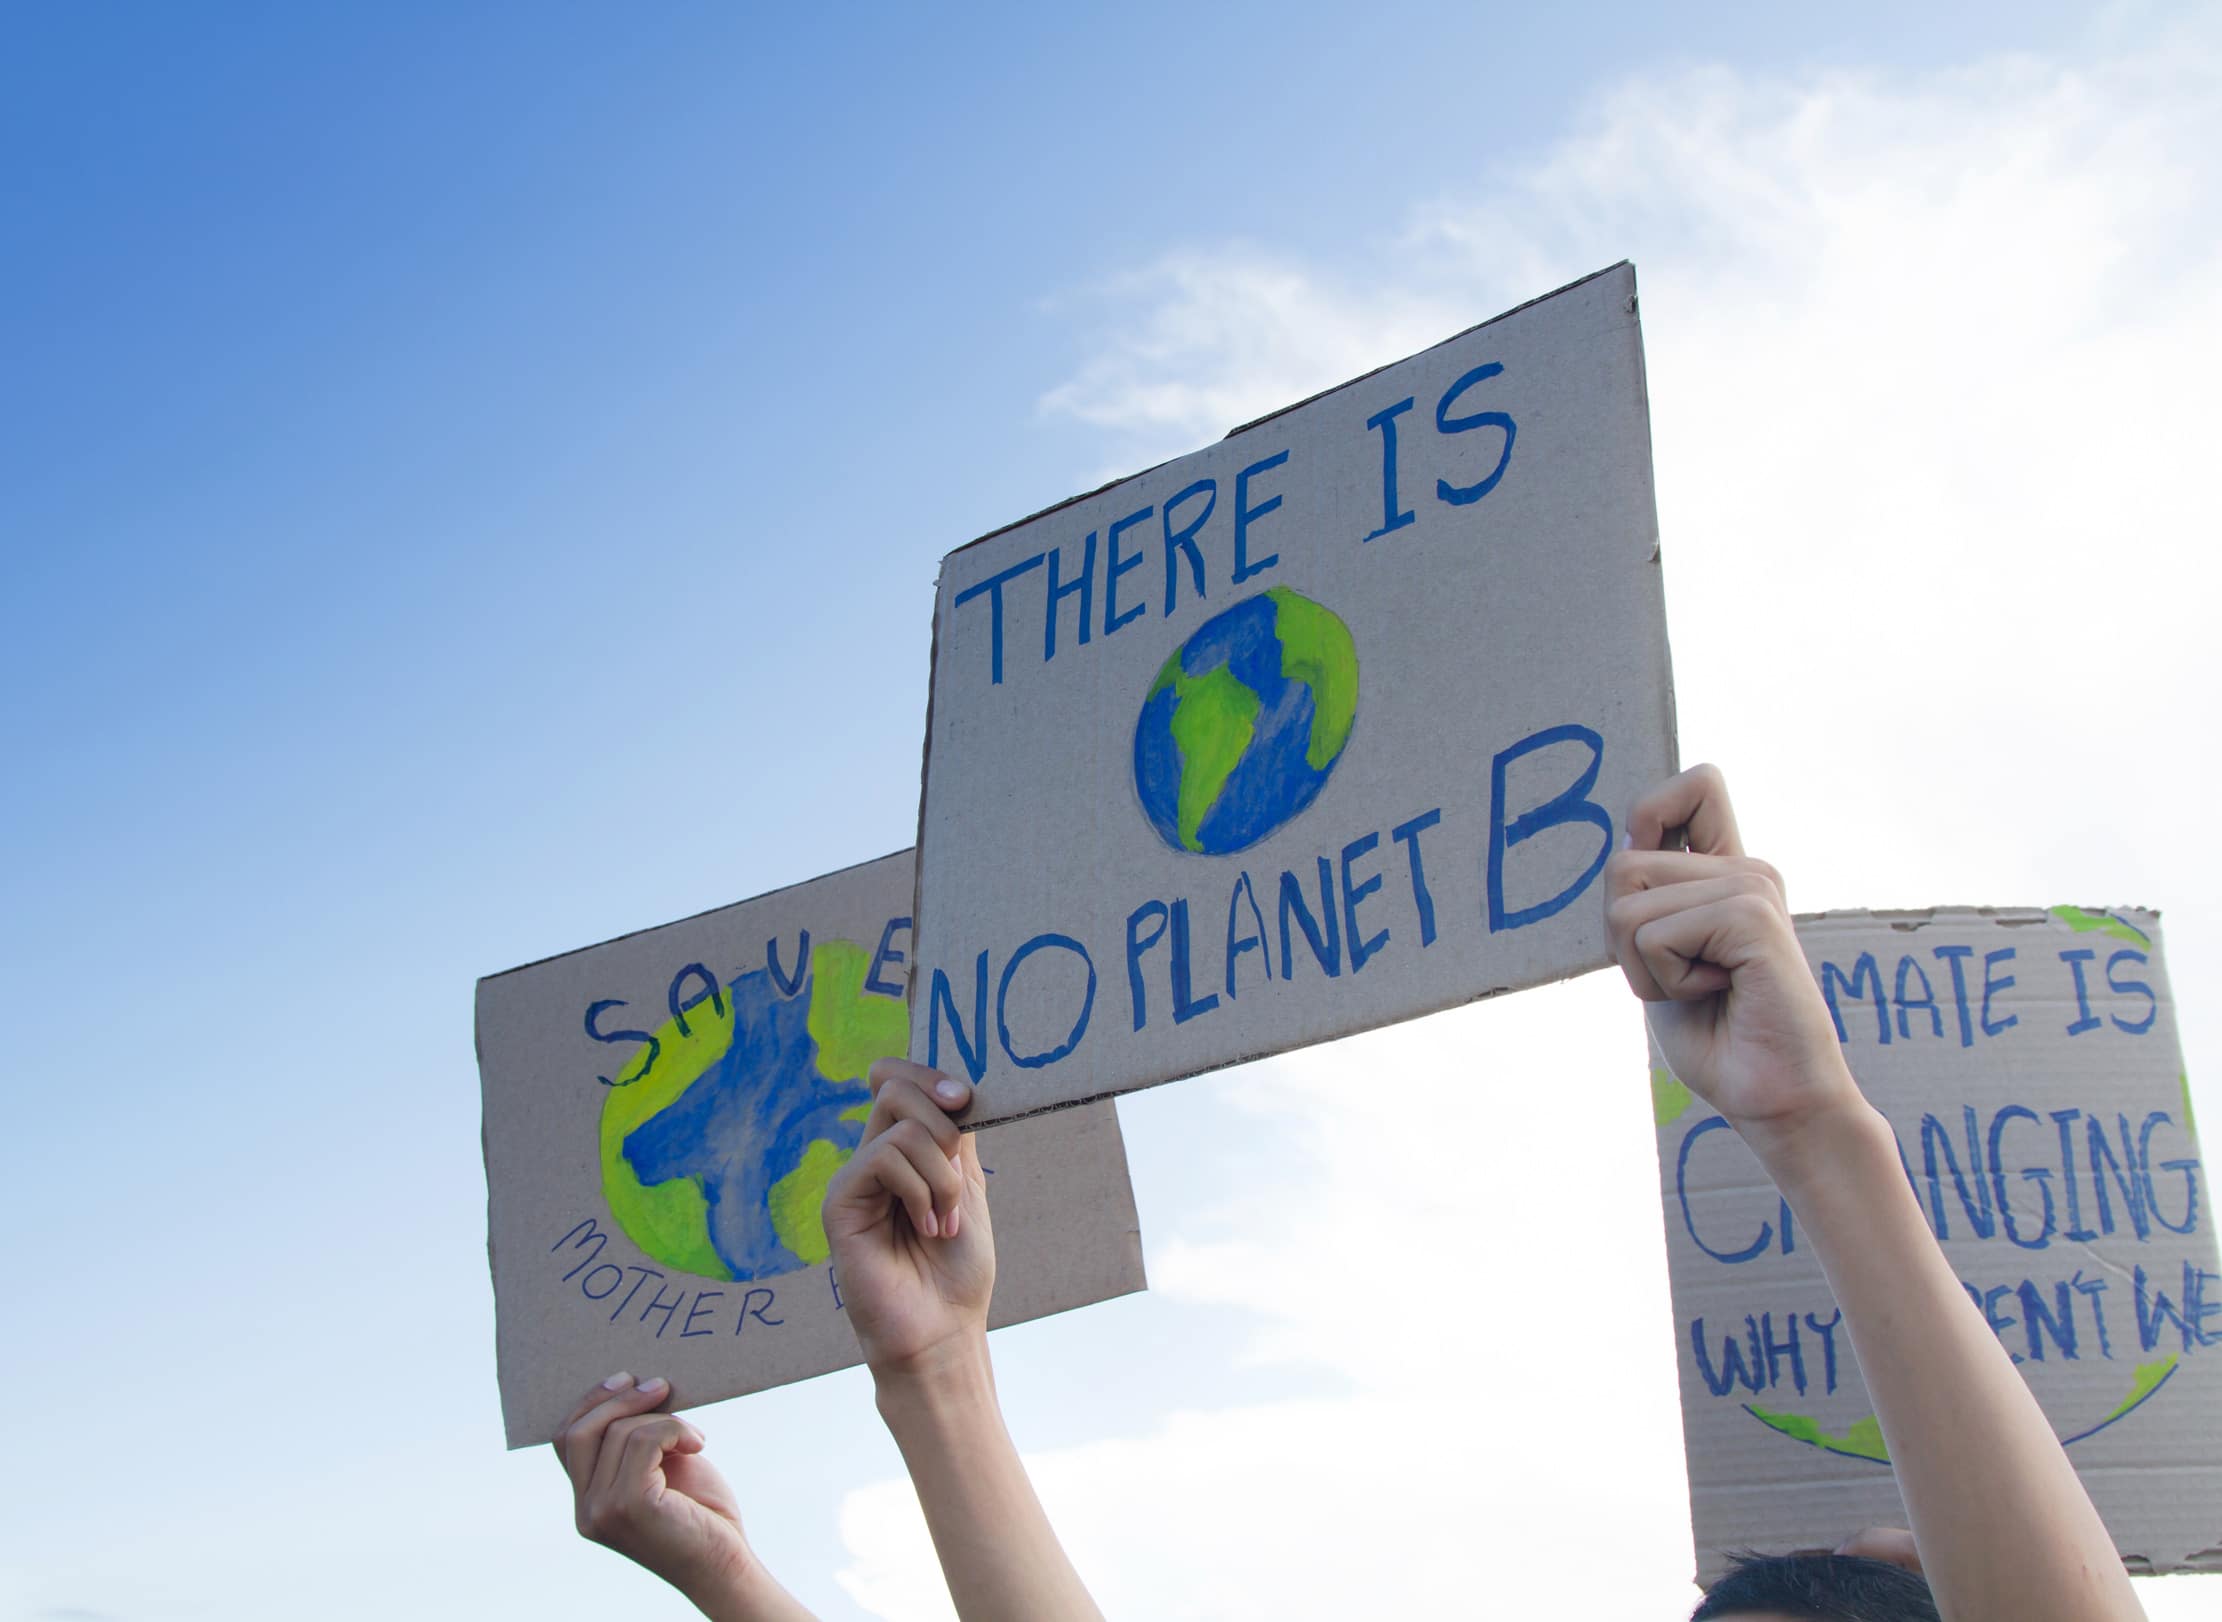 Signs with climate change slogans